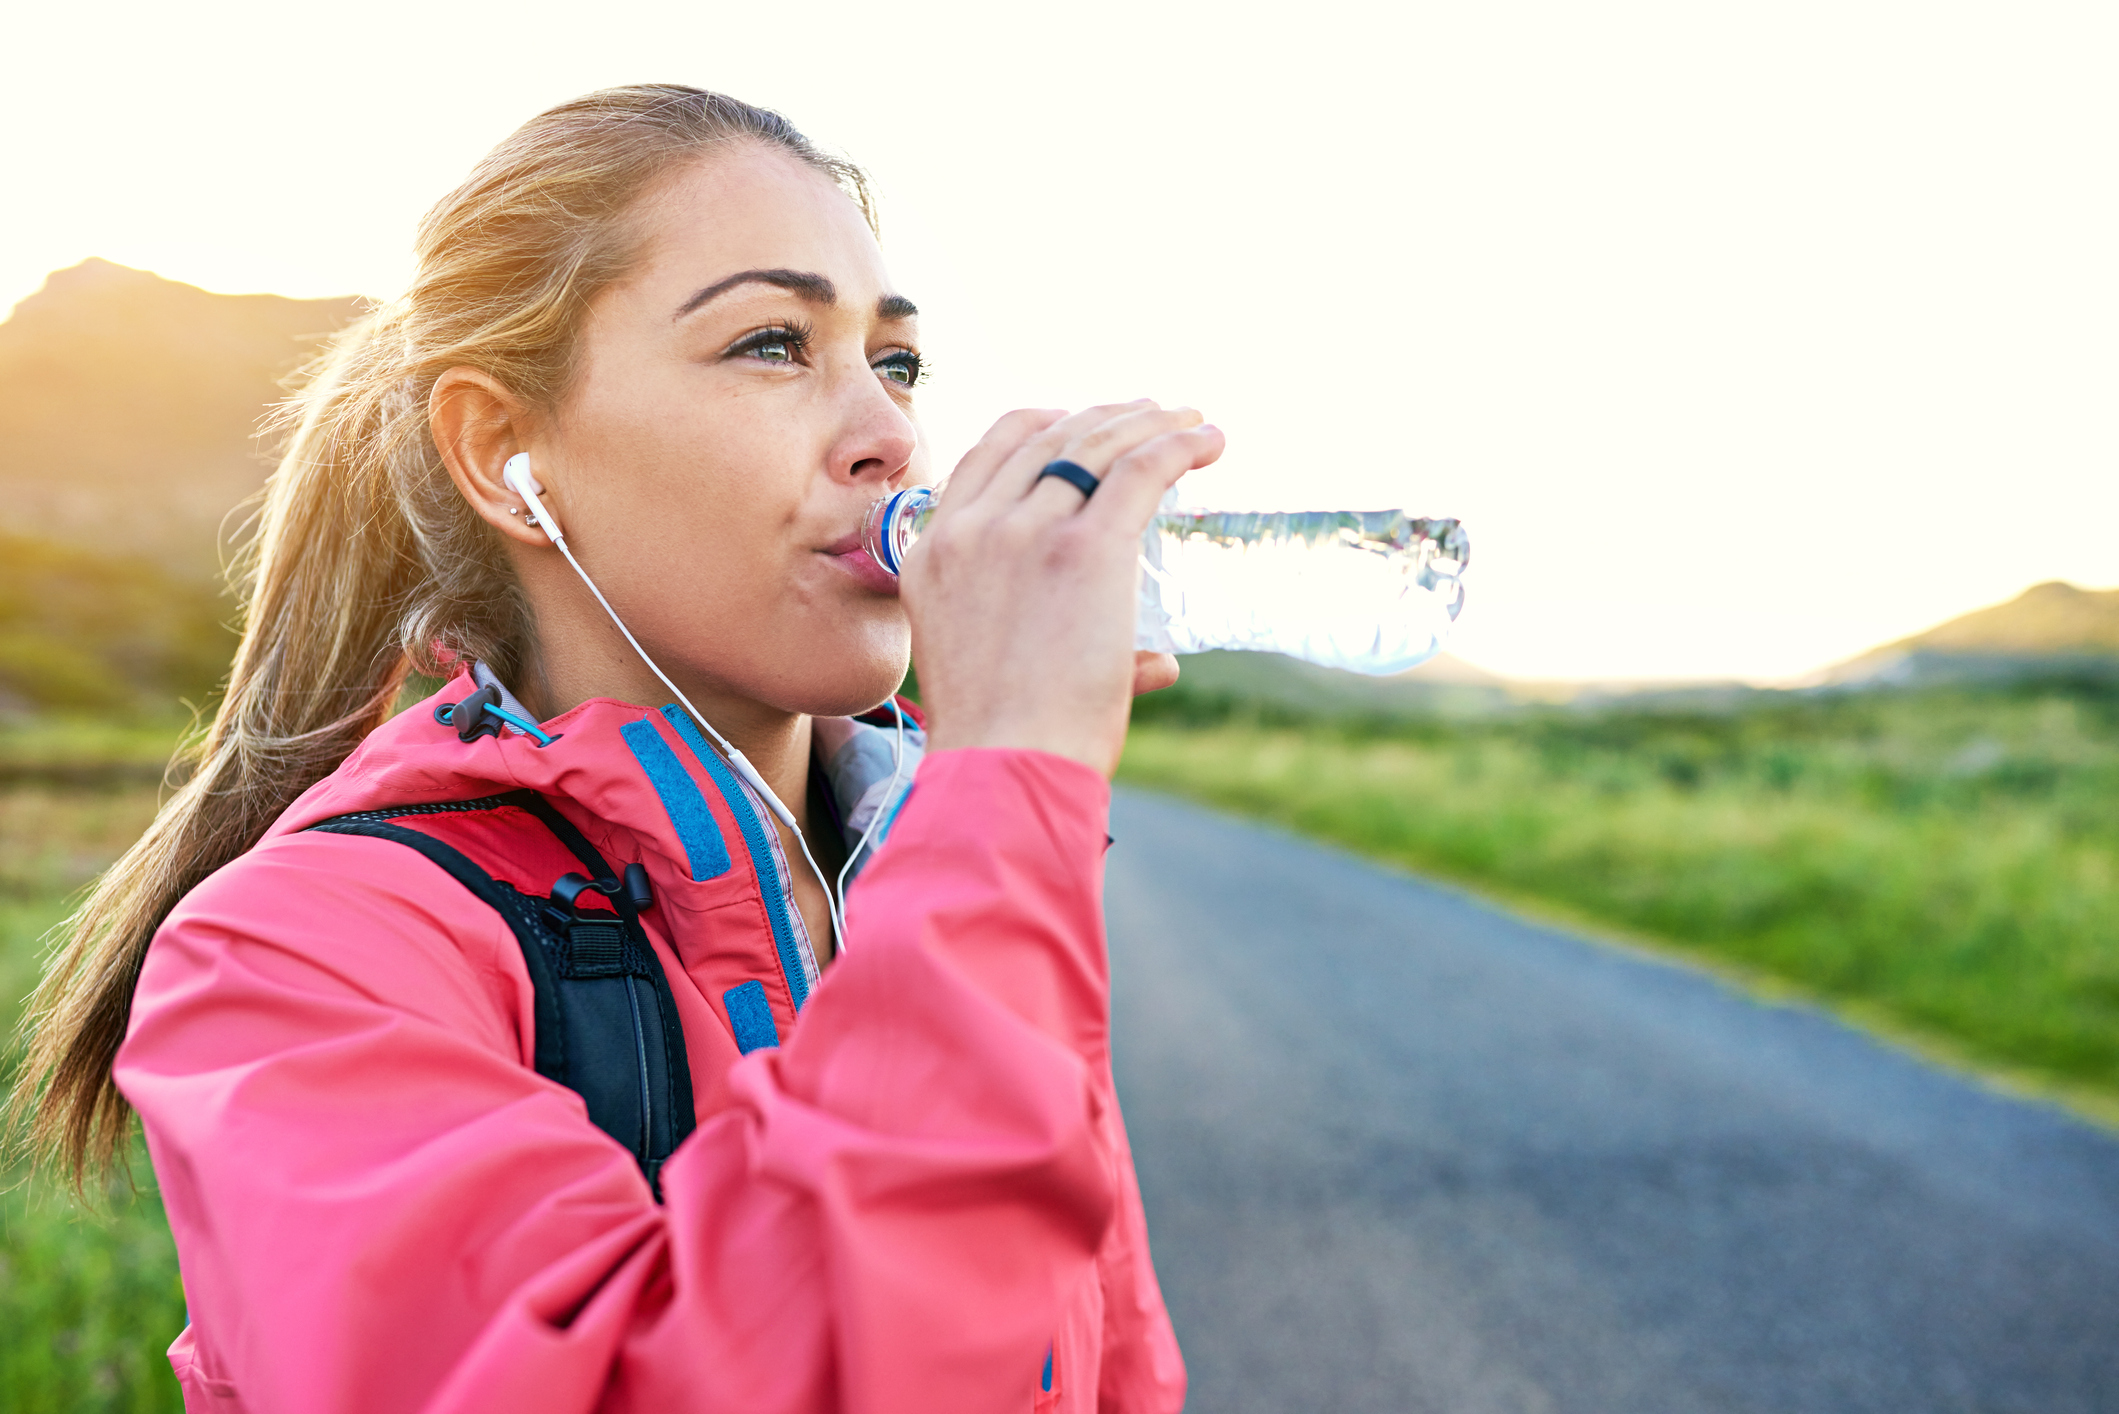 A woman taking a sip from her water bottle during her outdoor workout